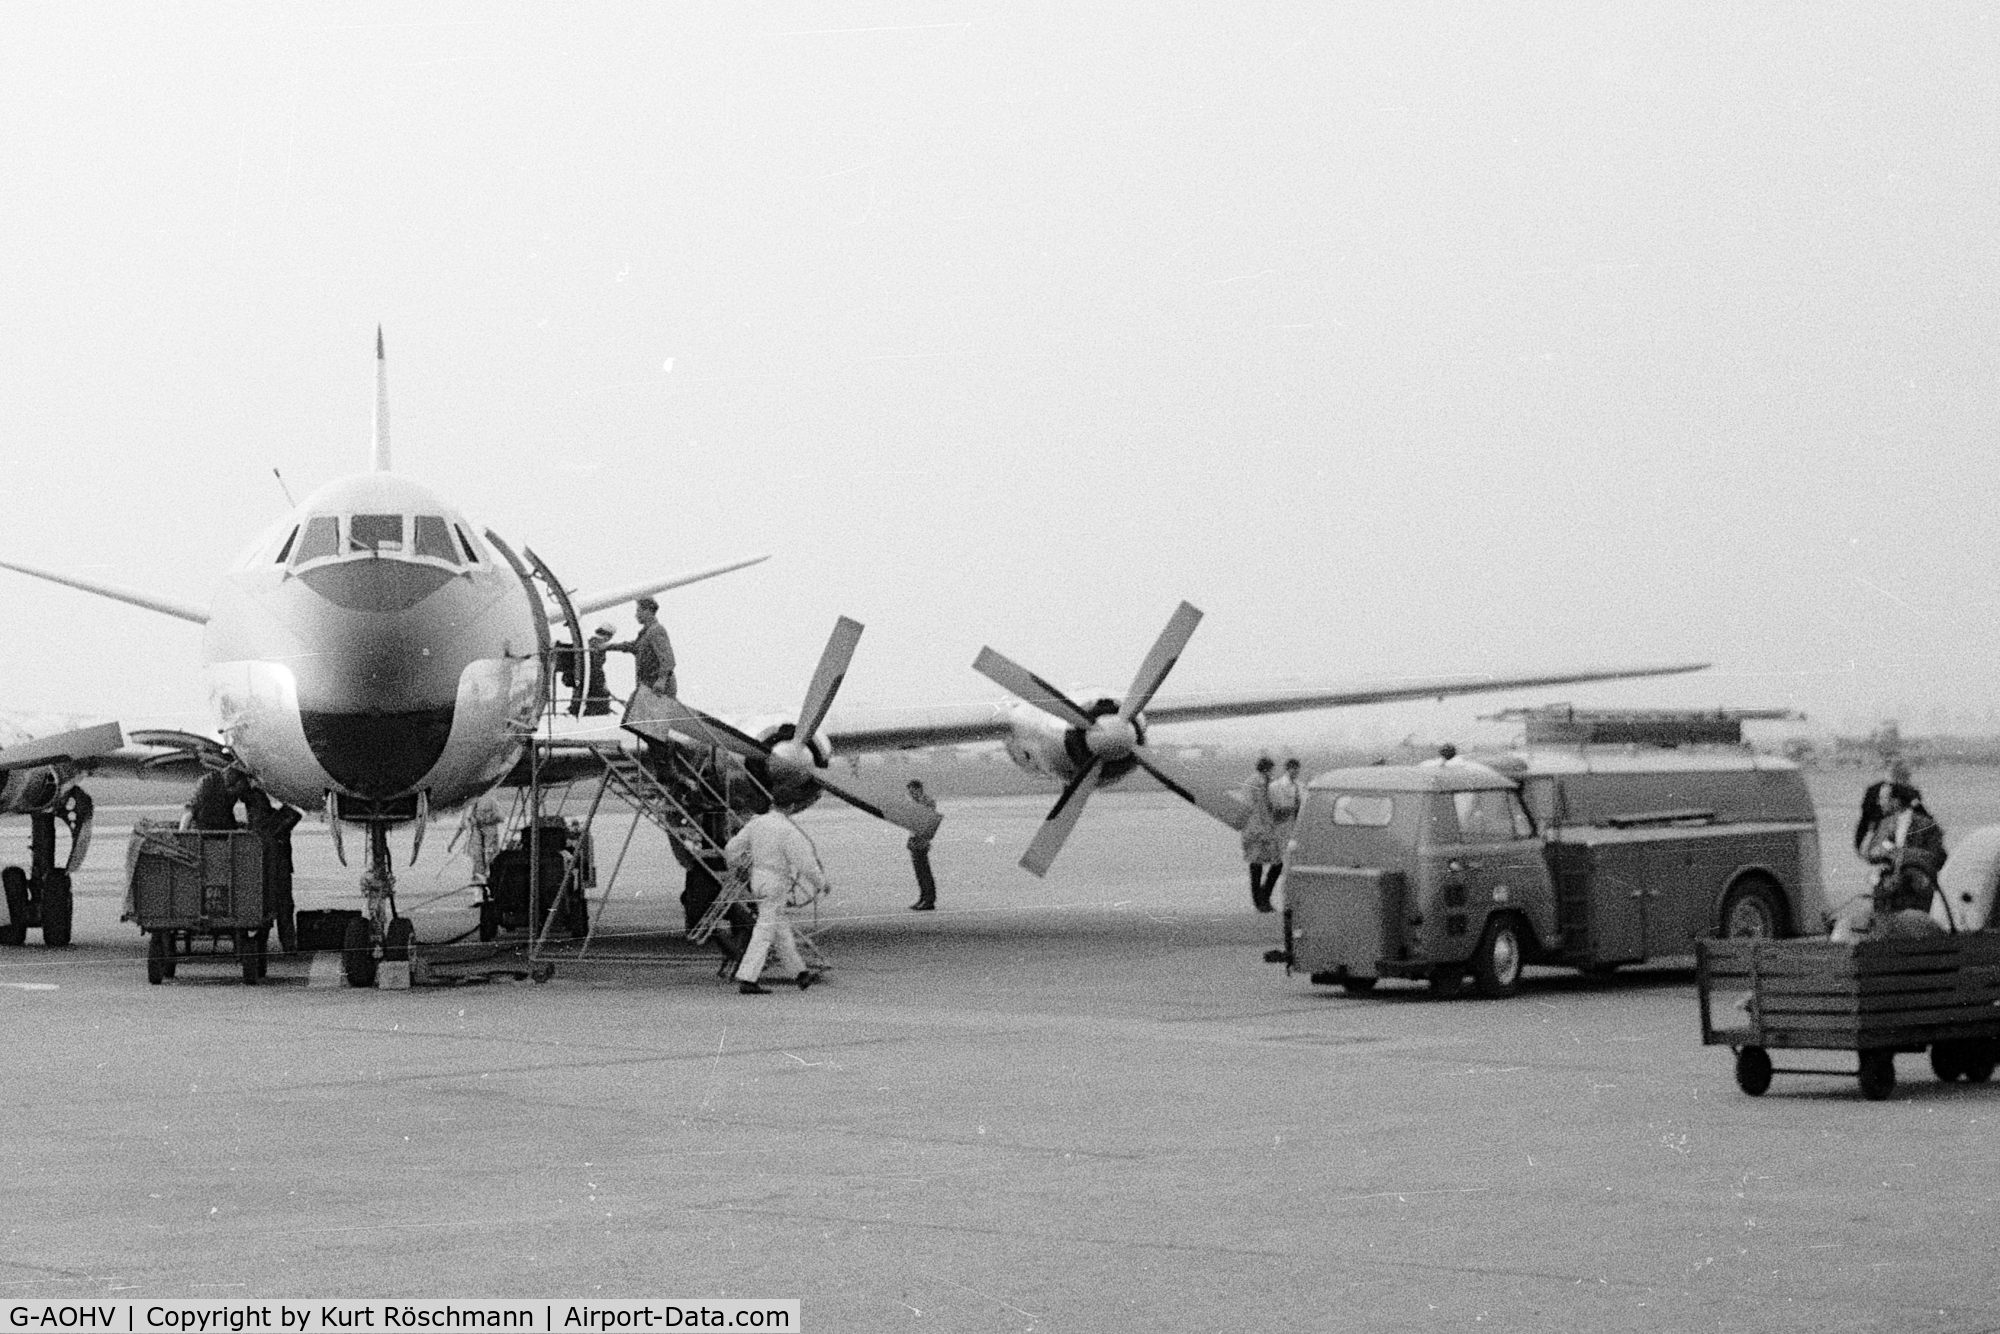 G-AOHV, 1957 Vickers Viscount 802 C/N 170, Berlin airport, ready for the flight back to Düsseldorf